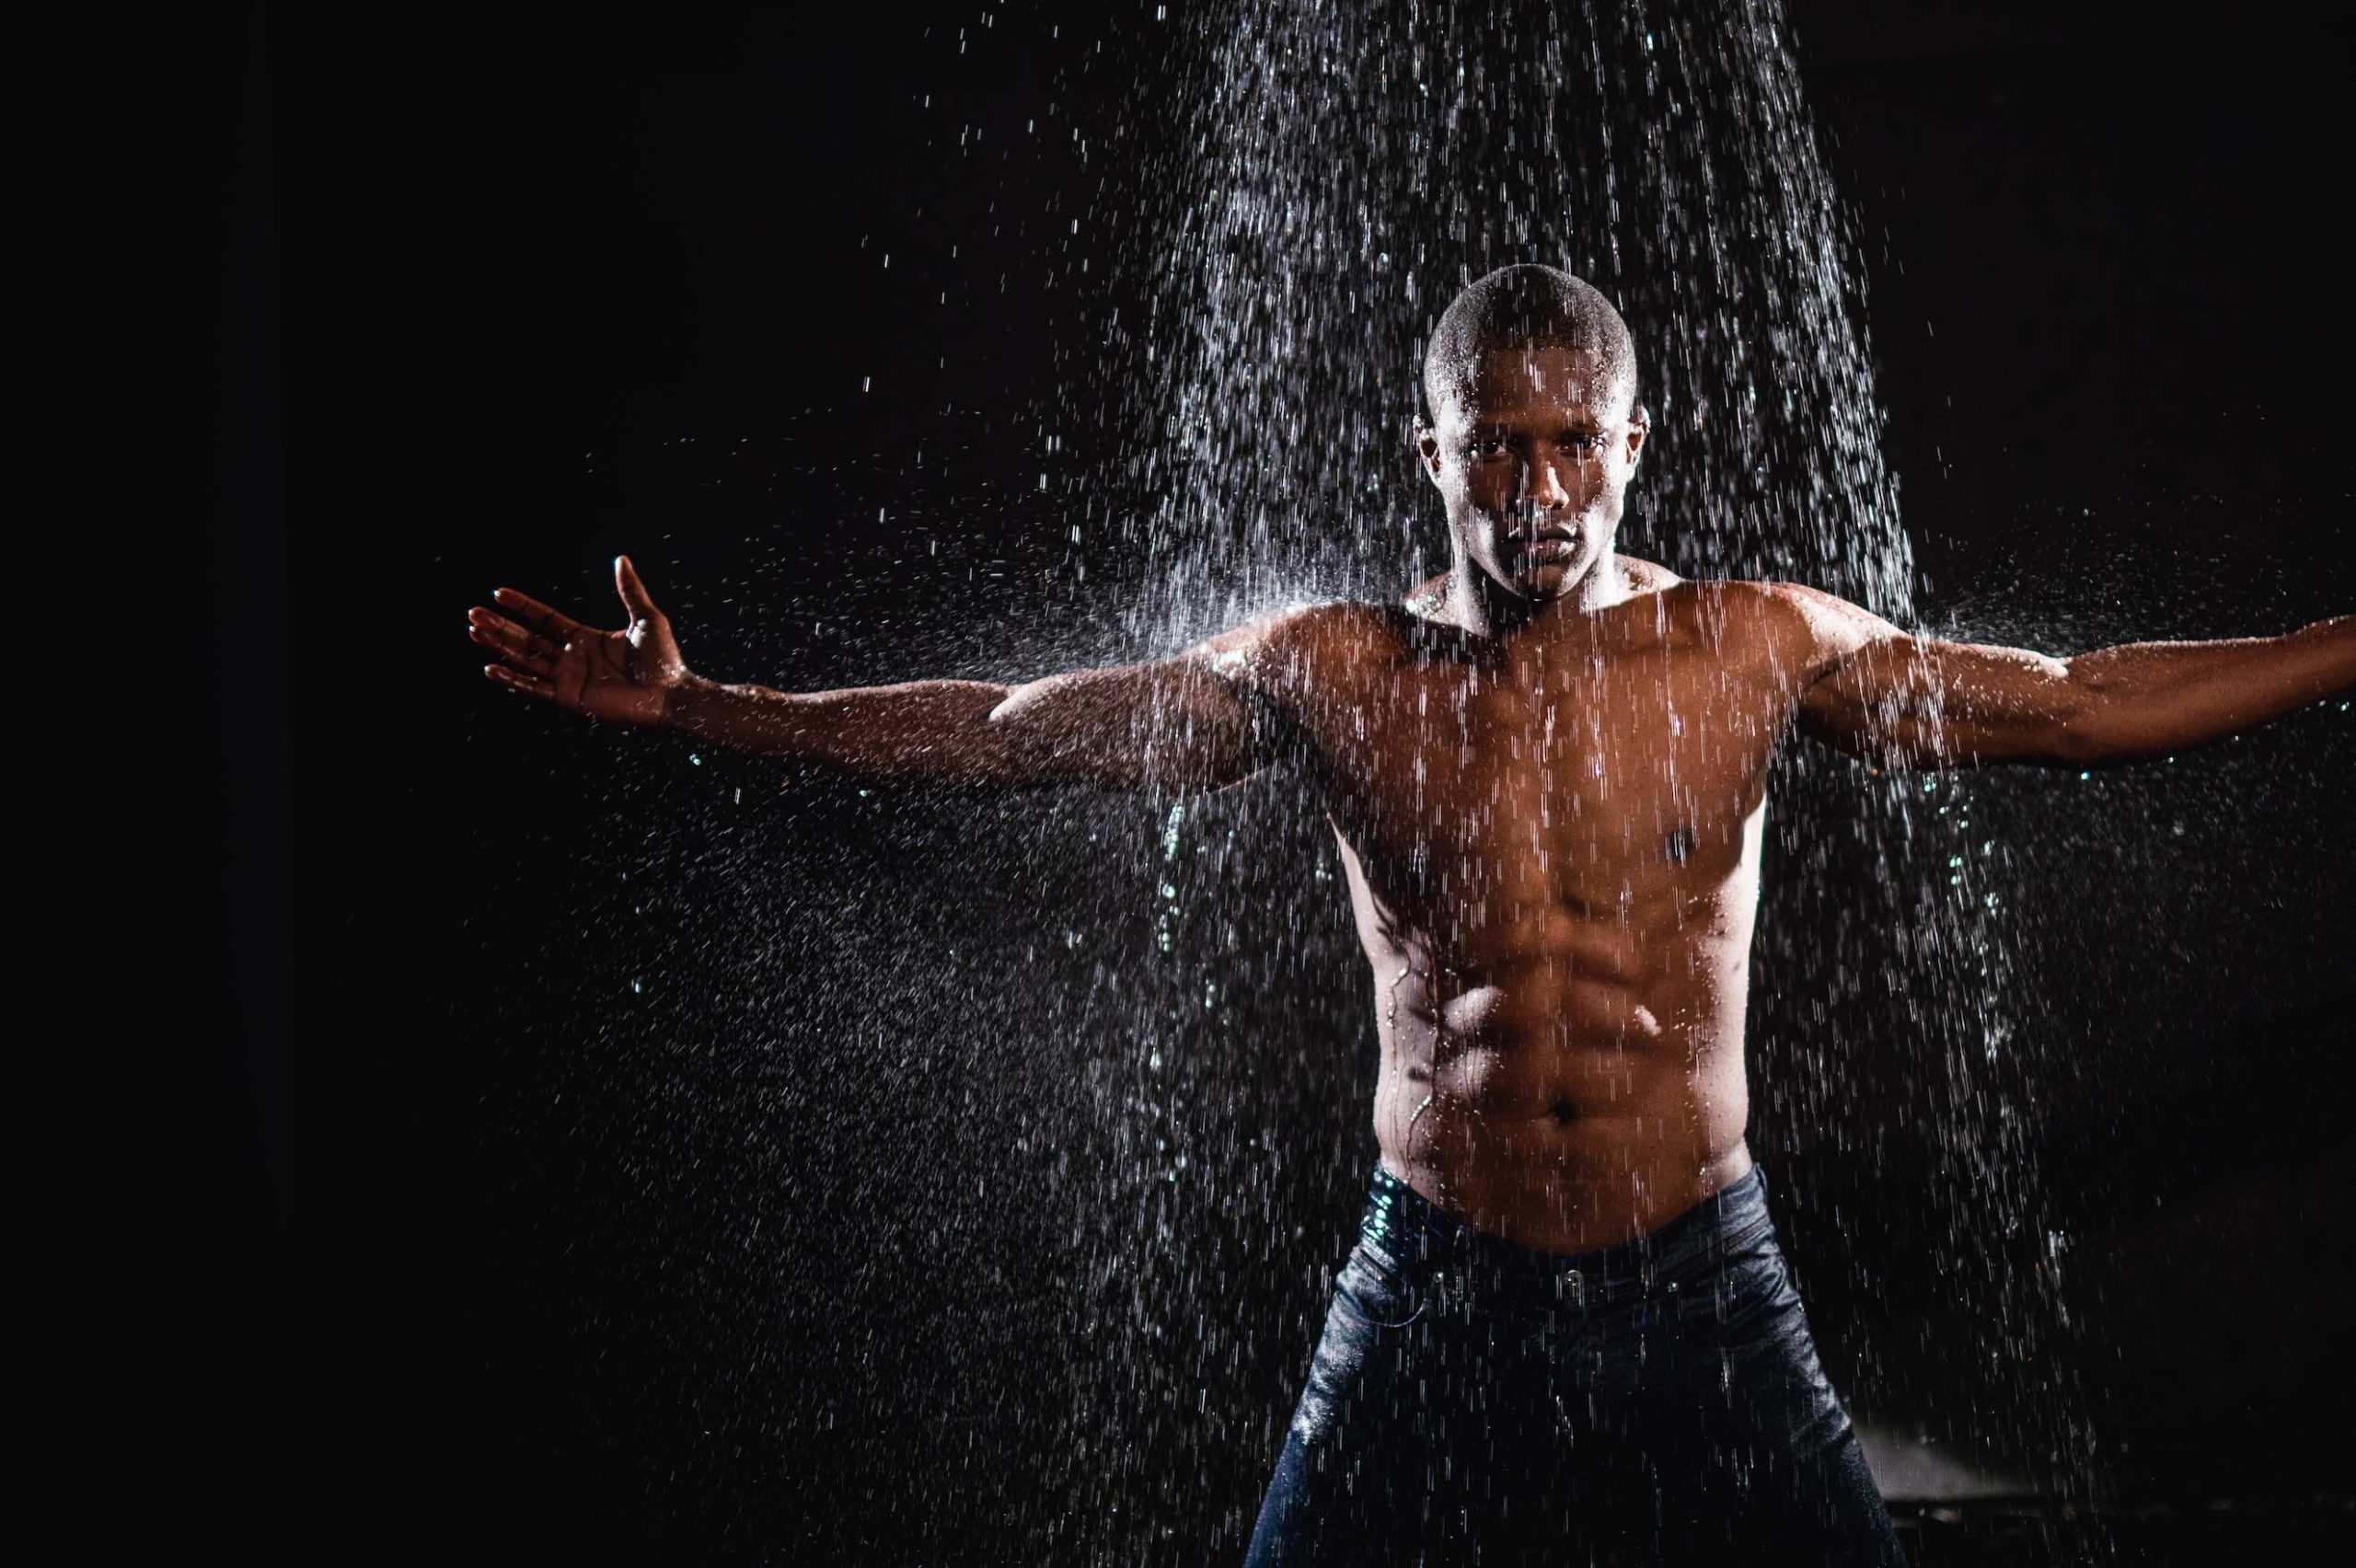 Crew Call Rain and Water Man with abs posing standing with arms outstretched to the sides under a shower of water